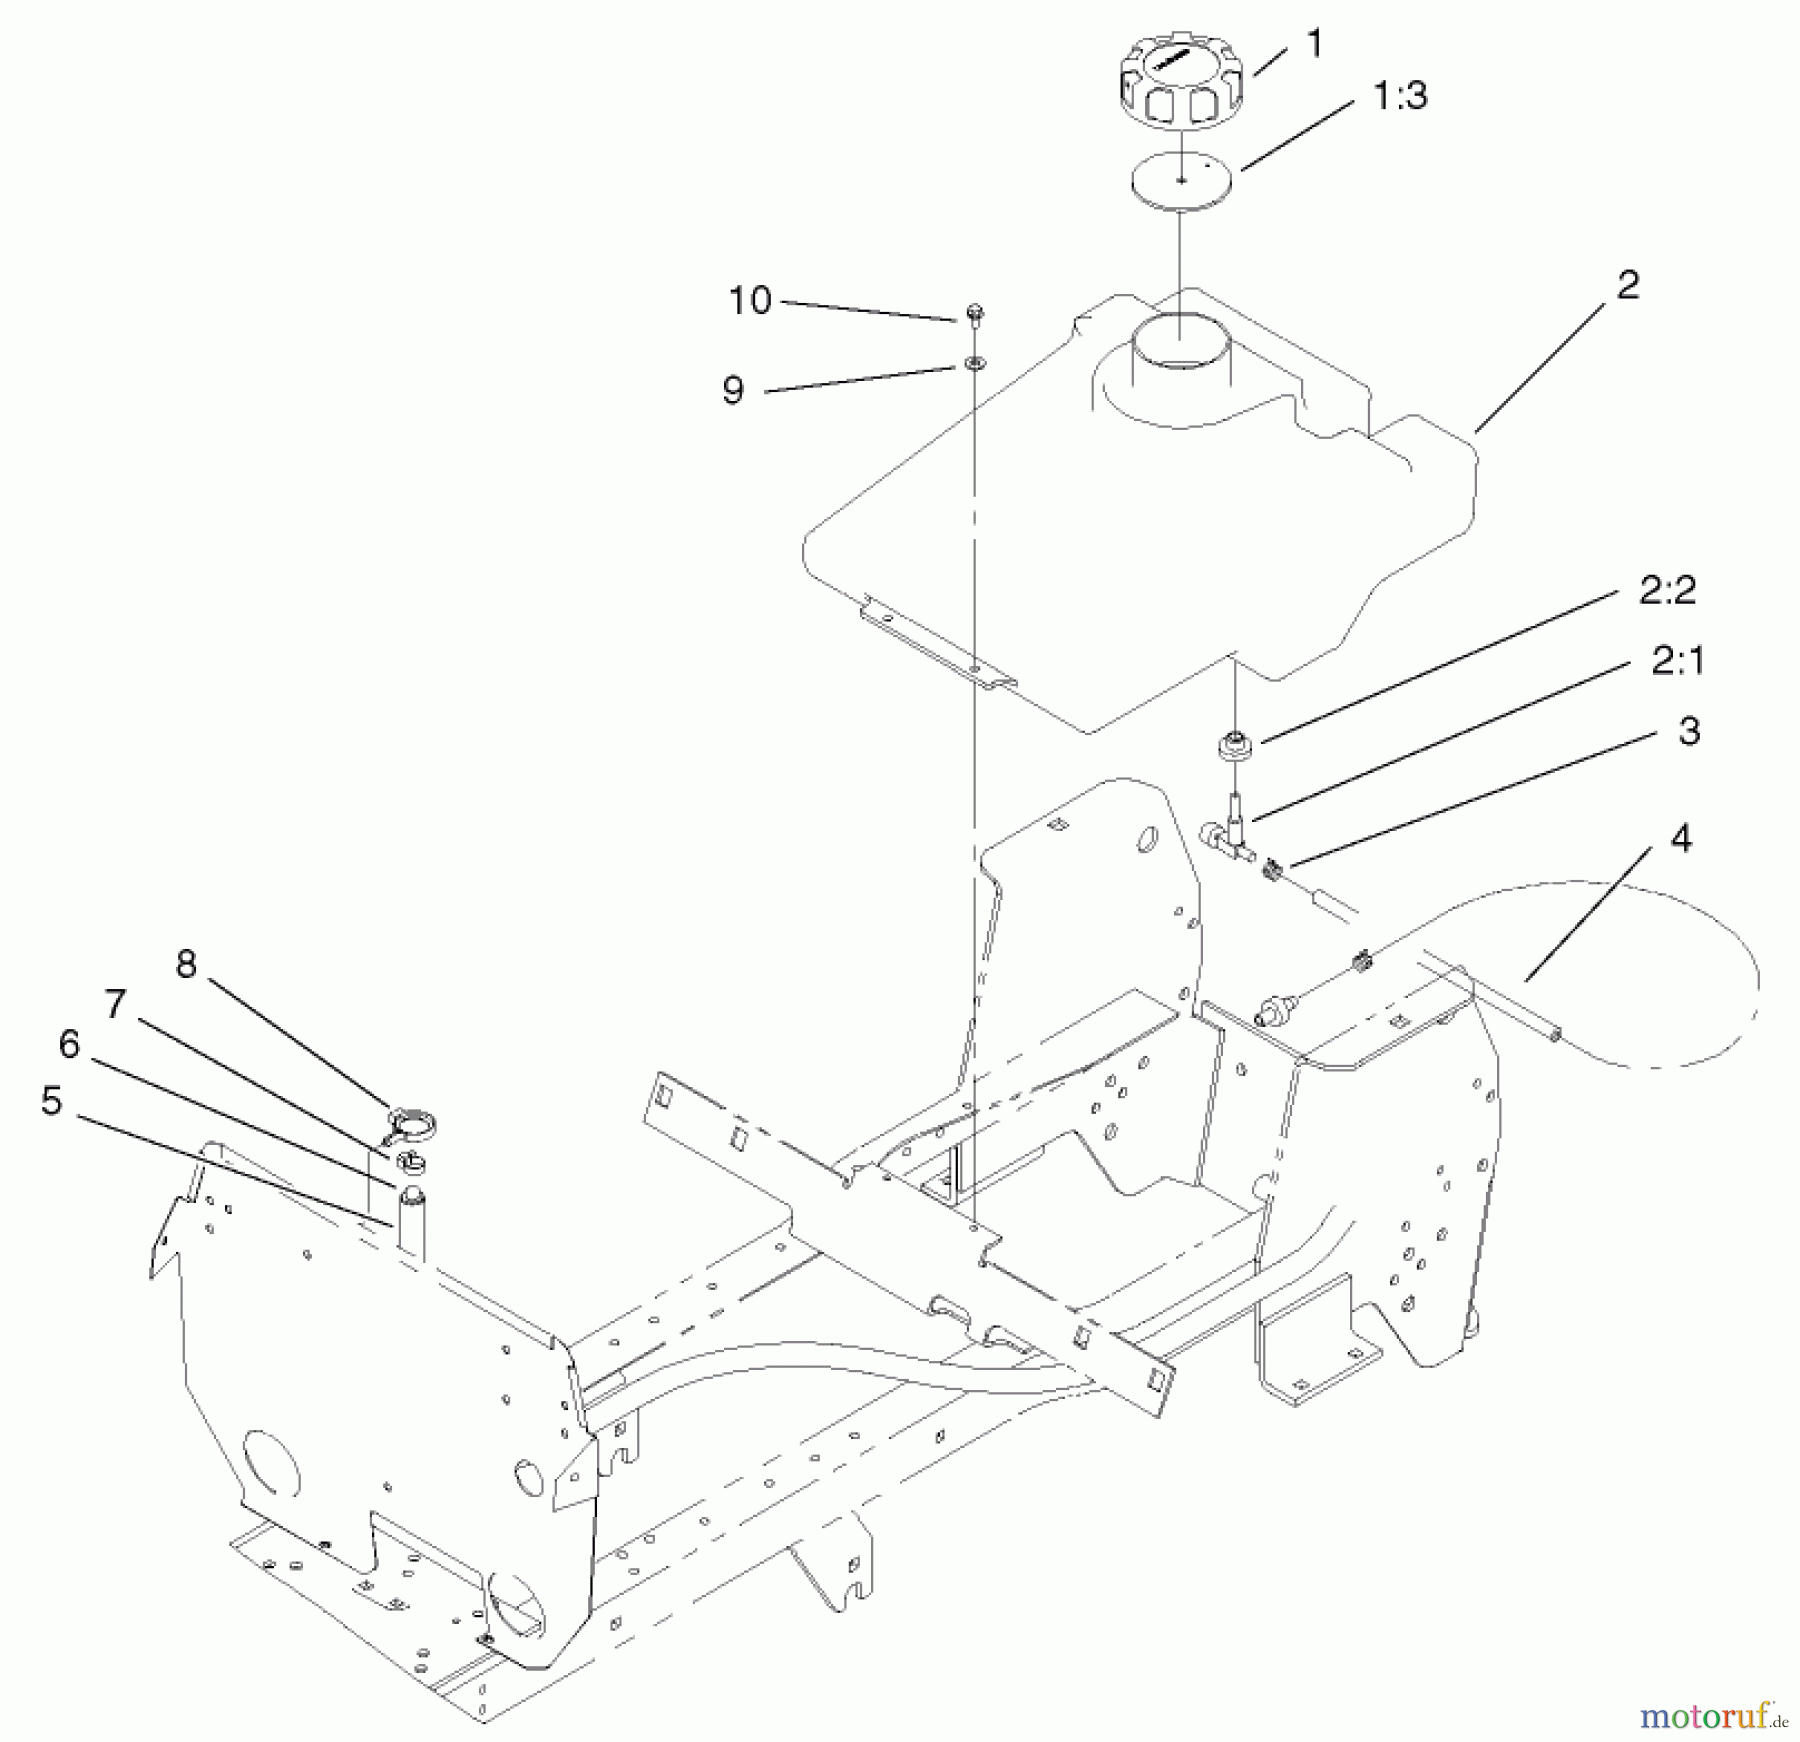  Toro Neu Mowers, Lawn & Garden Tractor Seite 1 72052 (266-H) - Toro 266-H Lawn and Garden Tractor, 2002 (220000001-220999999) FUEL TANK ASSEMBLY